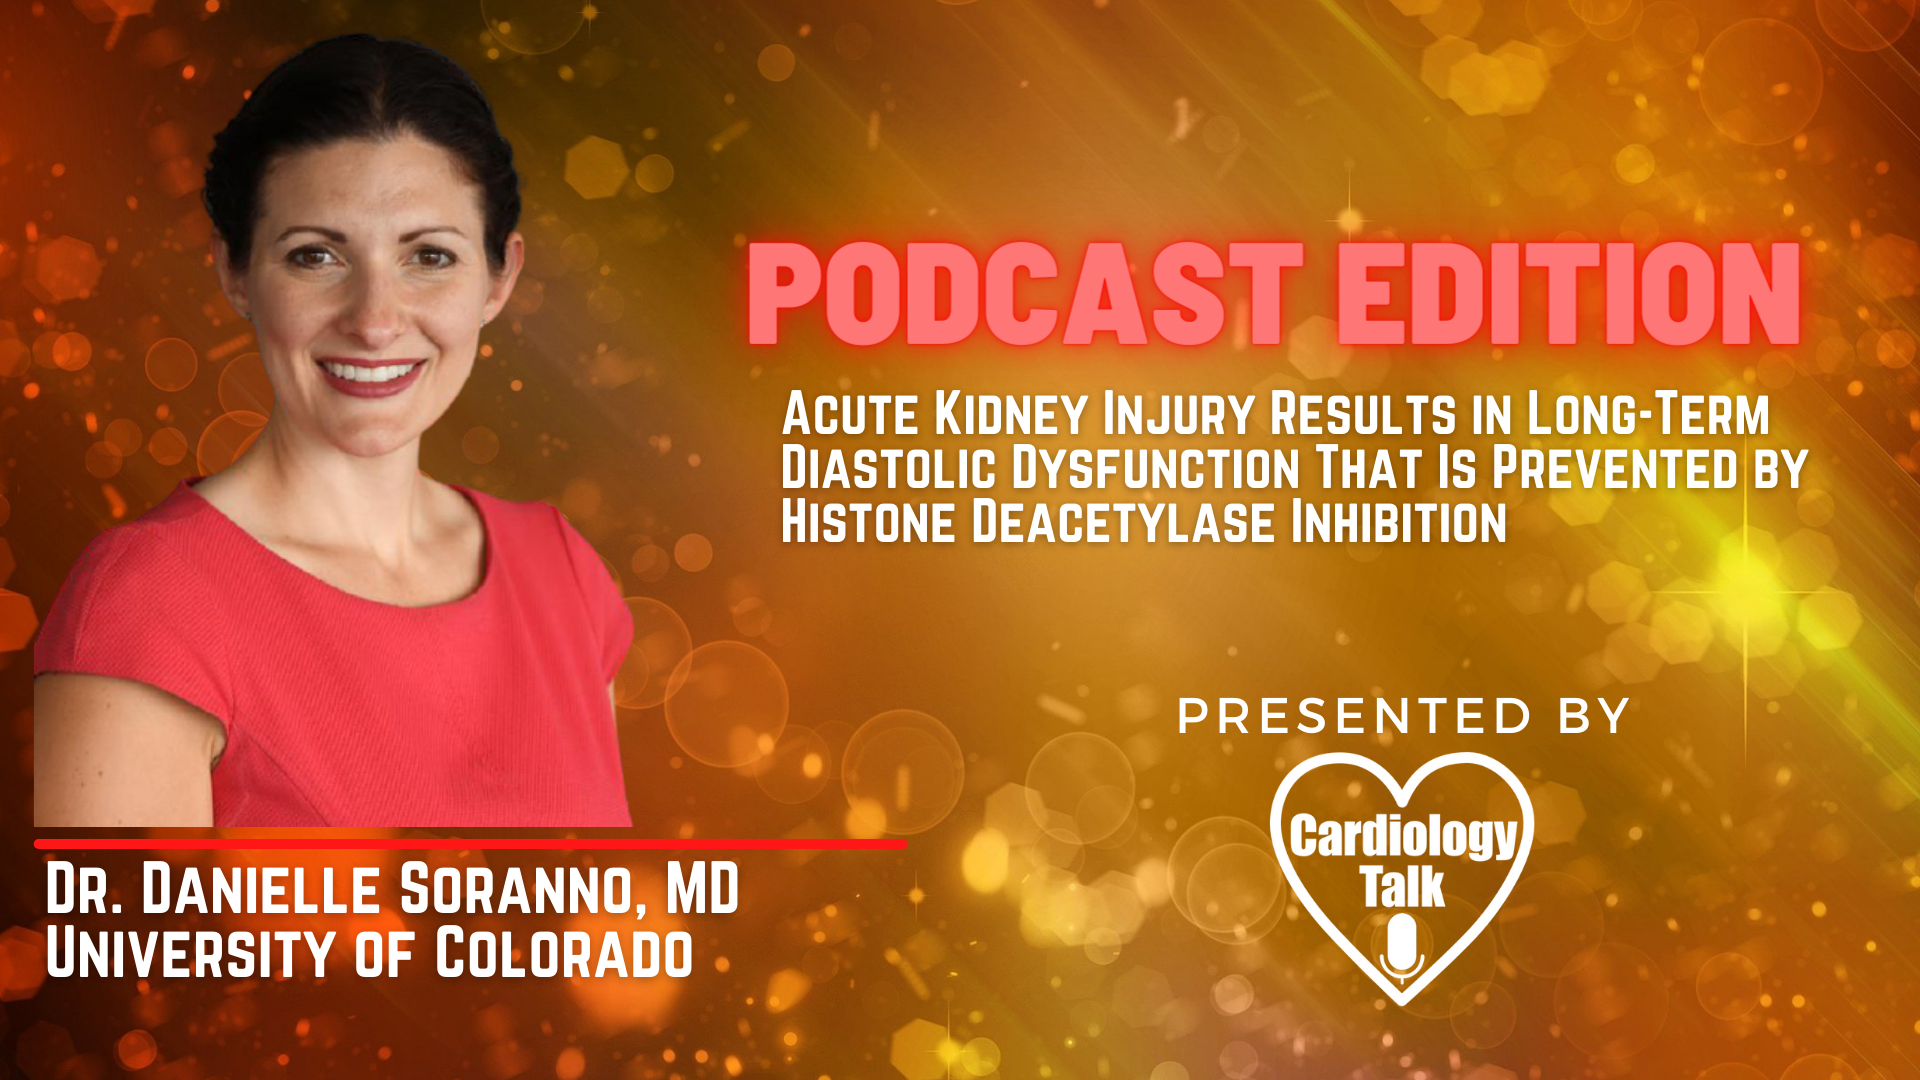 Dr. Danielle Soranno, MD- Acute Kidney Injury Results in Long-Term Diastolic Dysfunction That Is Prevented by Histone Deacetylase Inhibition